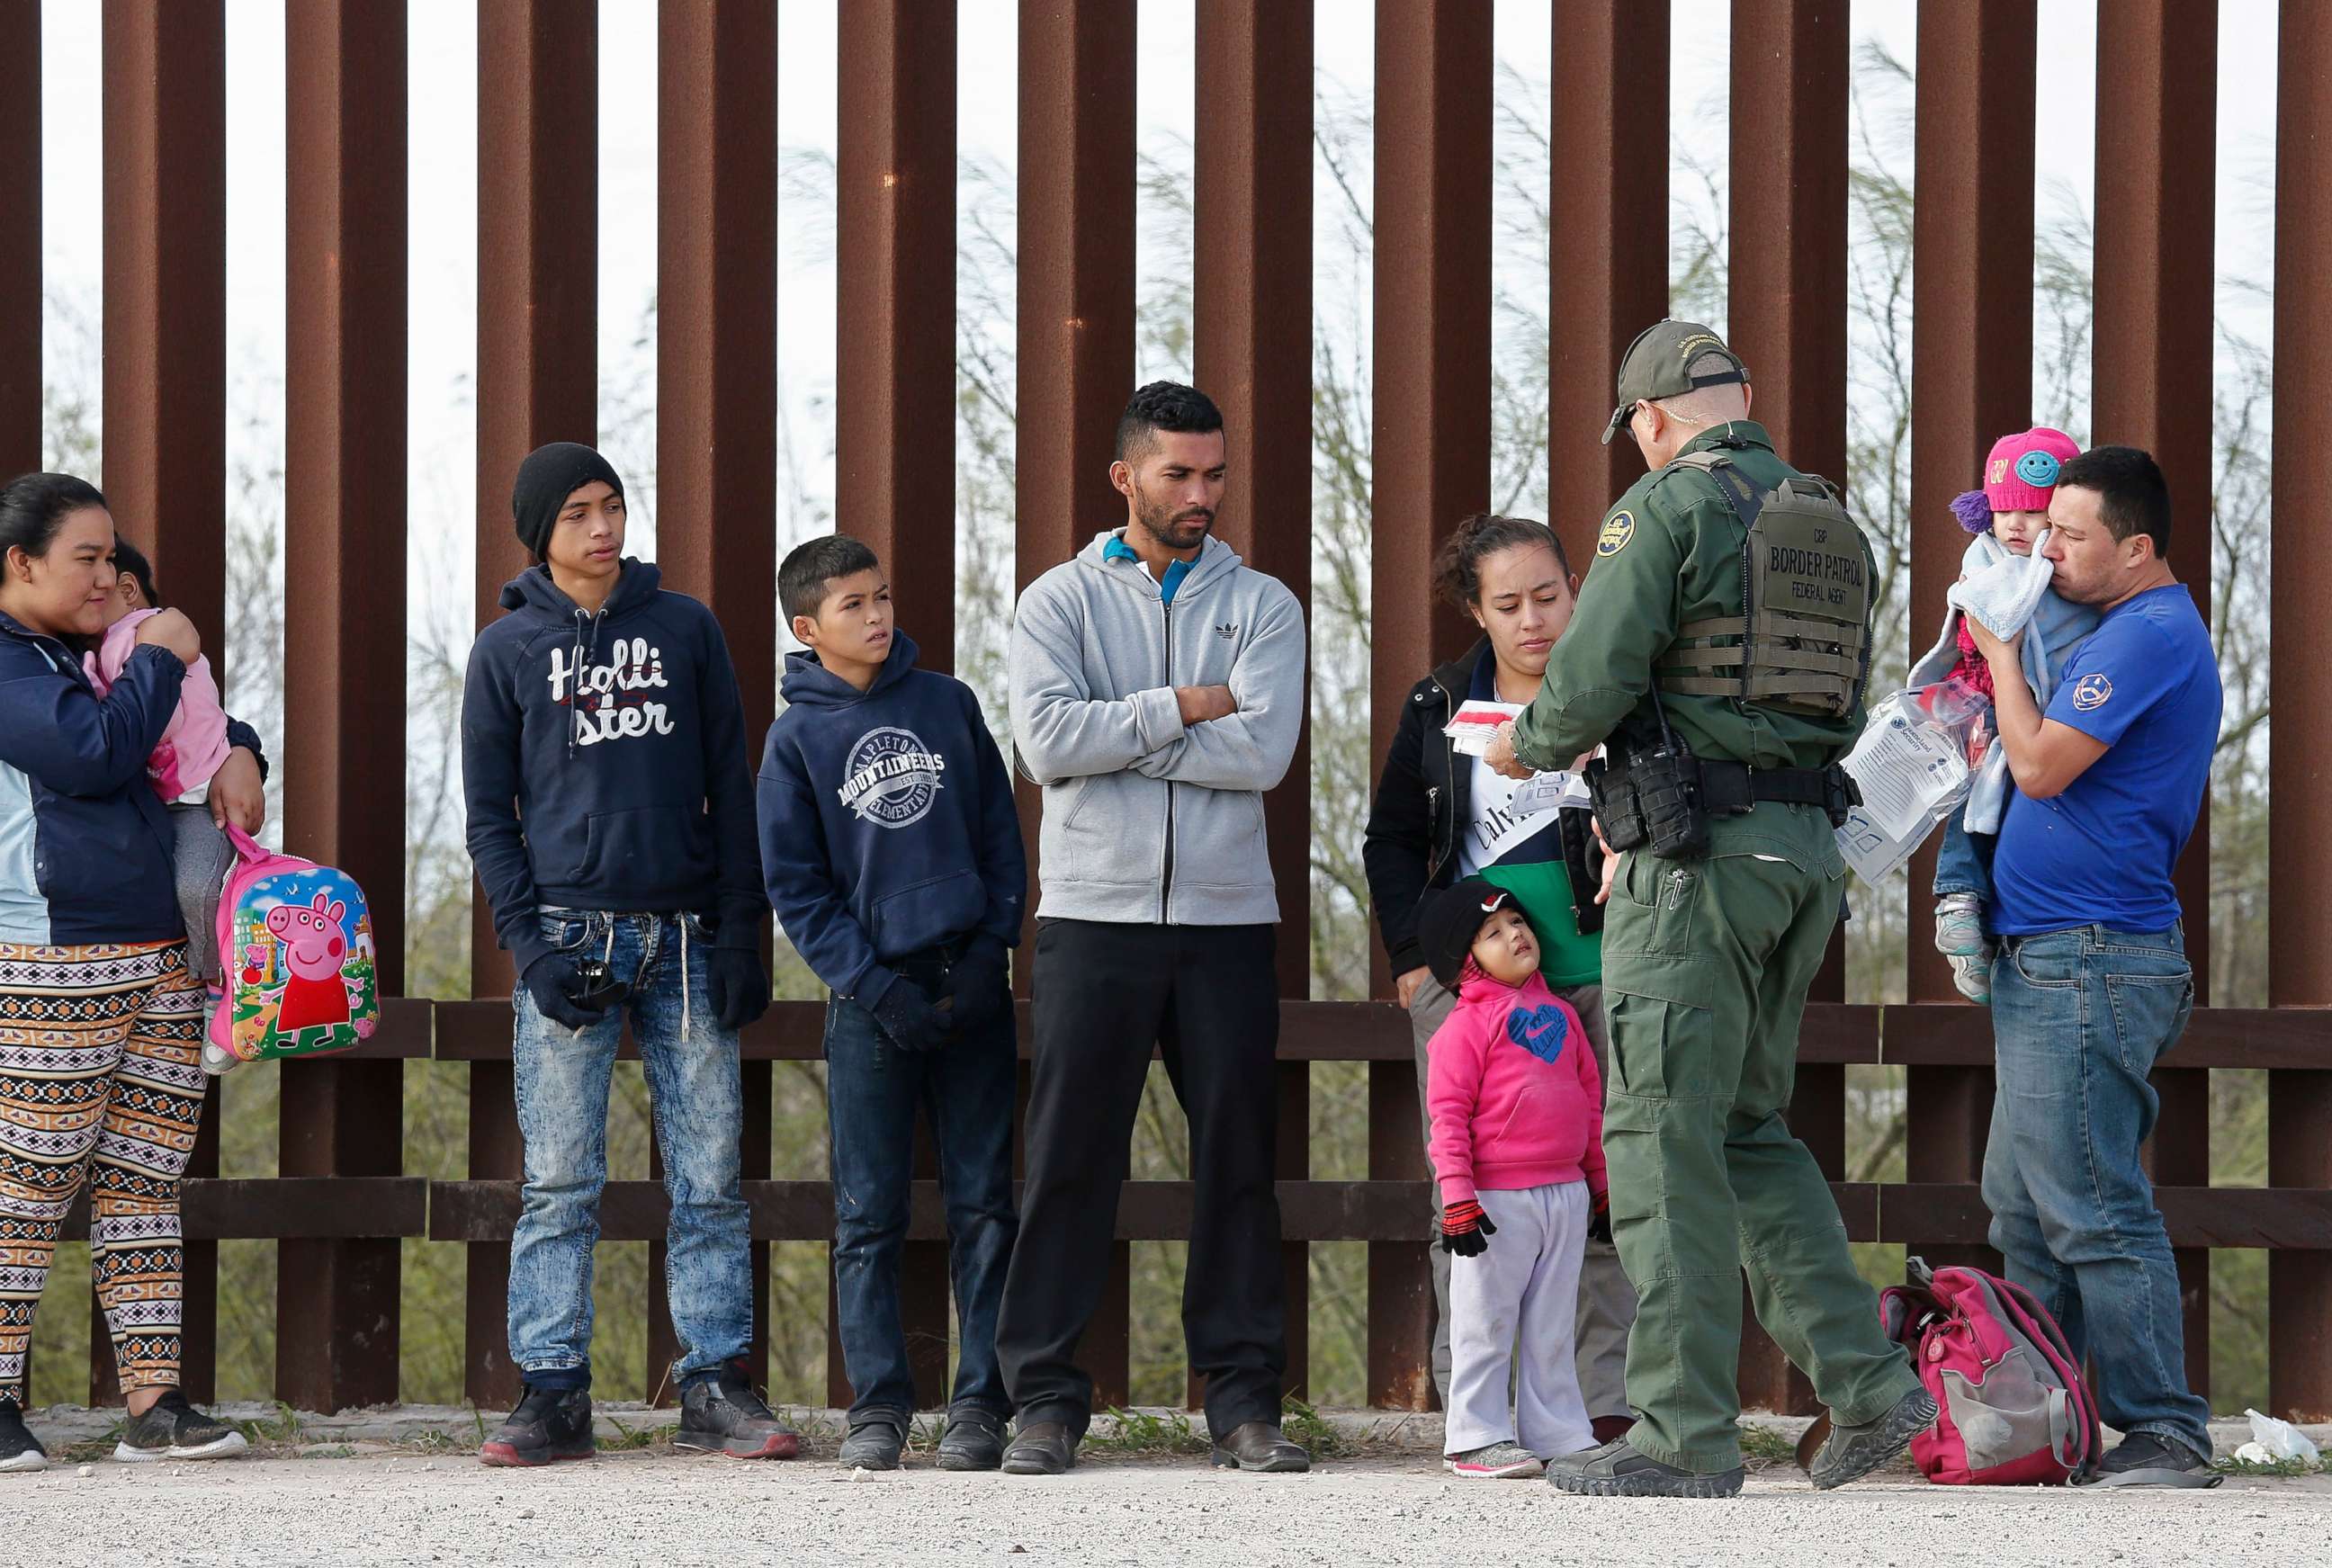 PHOTO: Families that crossed the border to enter the United States illegally turn themselves in to Border Patrol agents next to a fence along the Rio Grande River near McAllen, in Texas, Jan. 23, 2019.